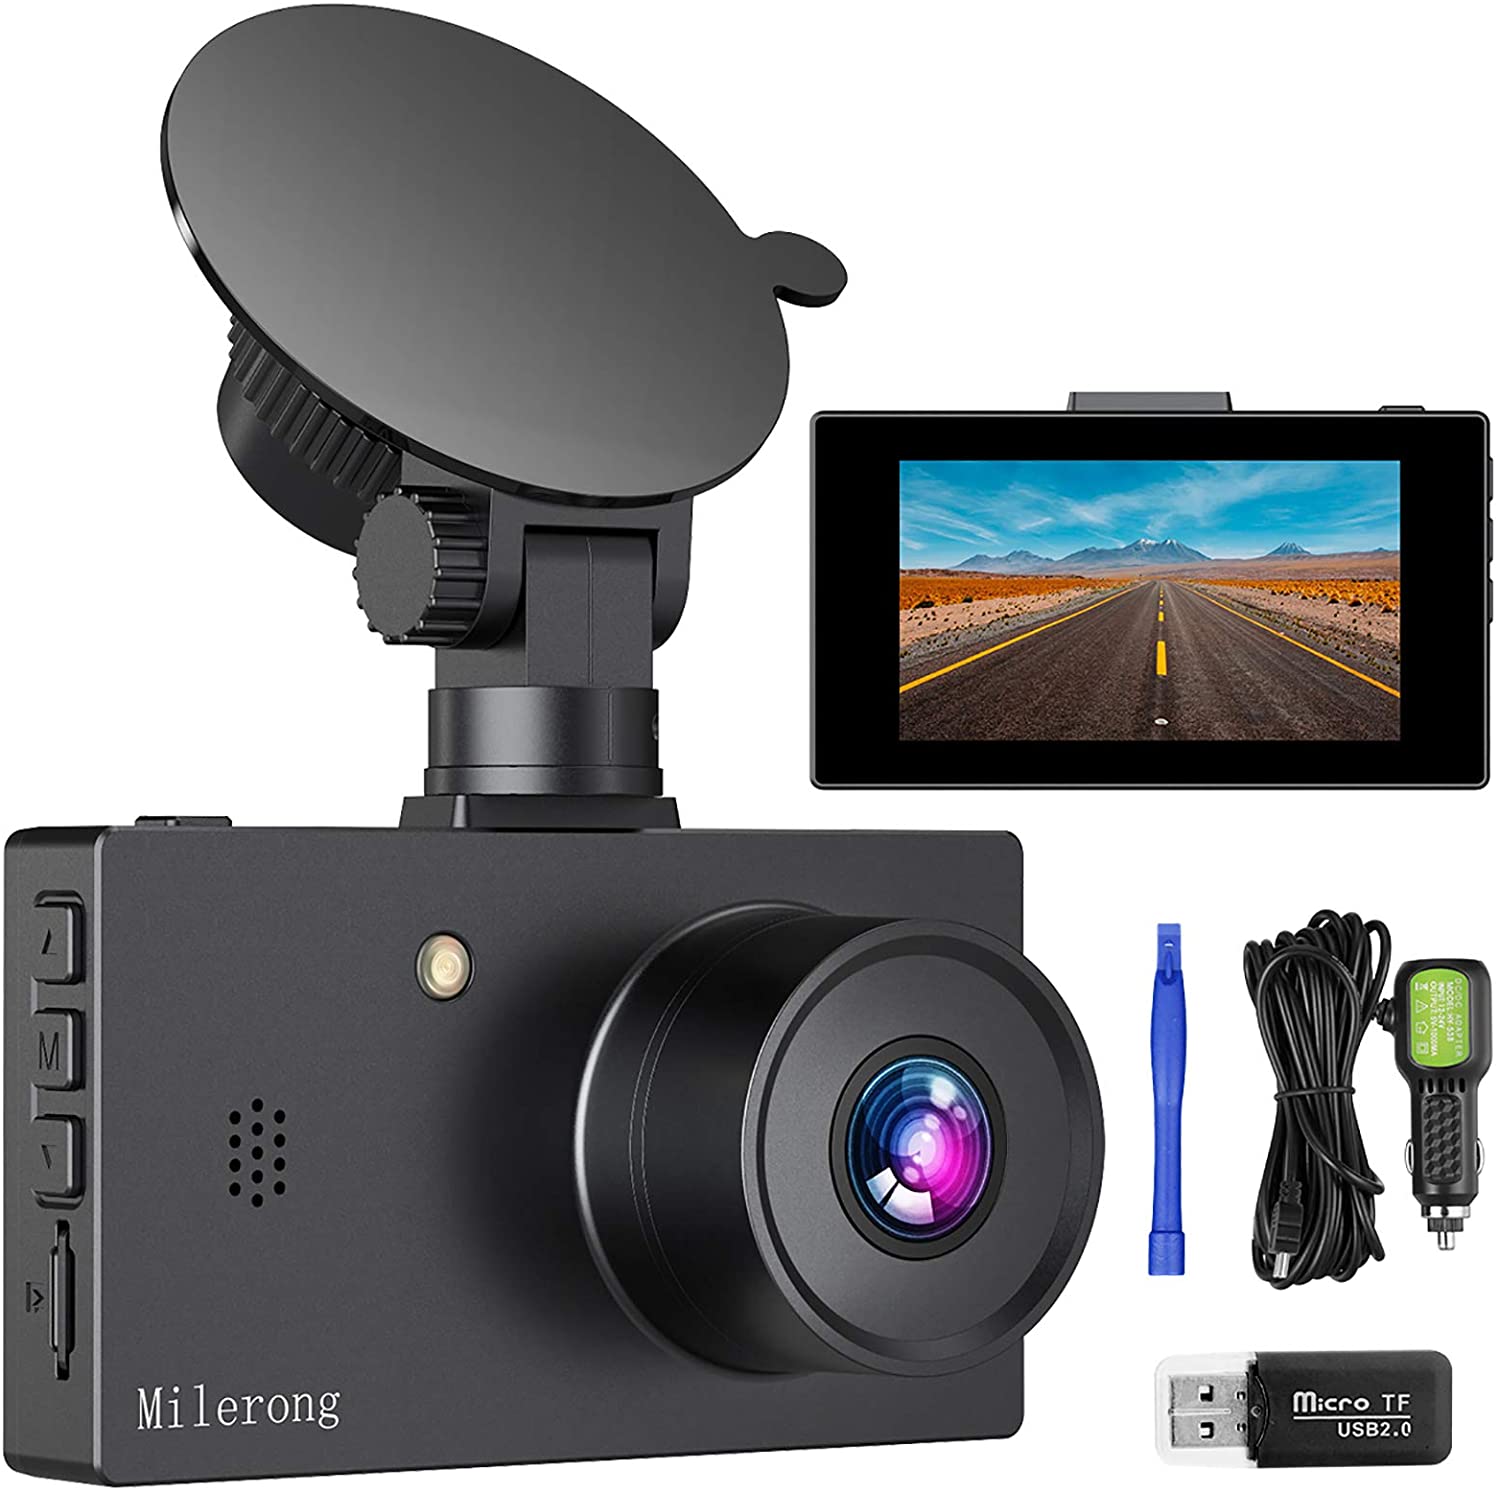 Camera Voiture dashcam AT550 vision nocturne Full HD 1080 grand angle  G-capteur WDR Maroc 